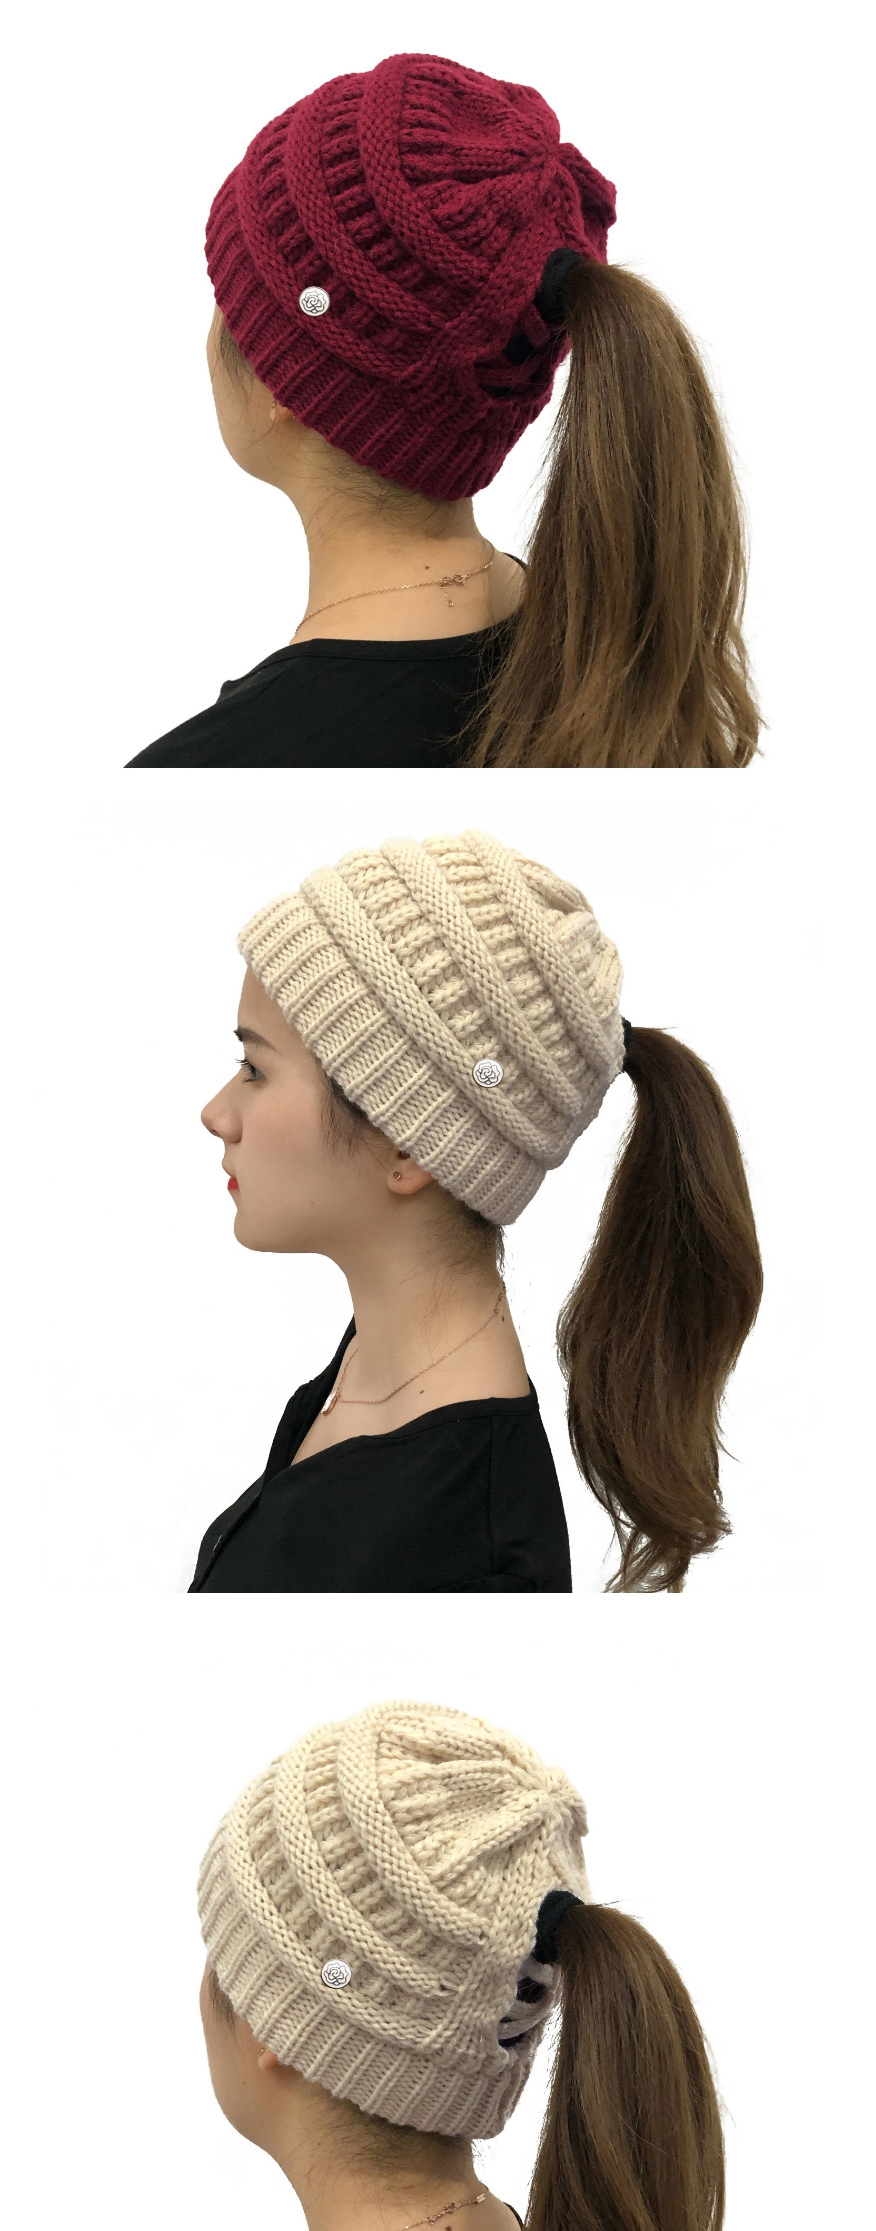 Fashion Black Button Detachable Cross-back Ponytail Knitted Hat,Knitting Wool Hats